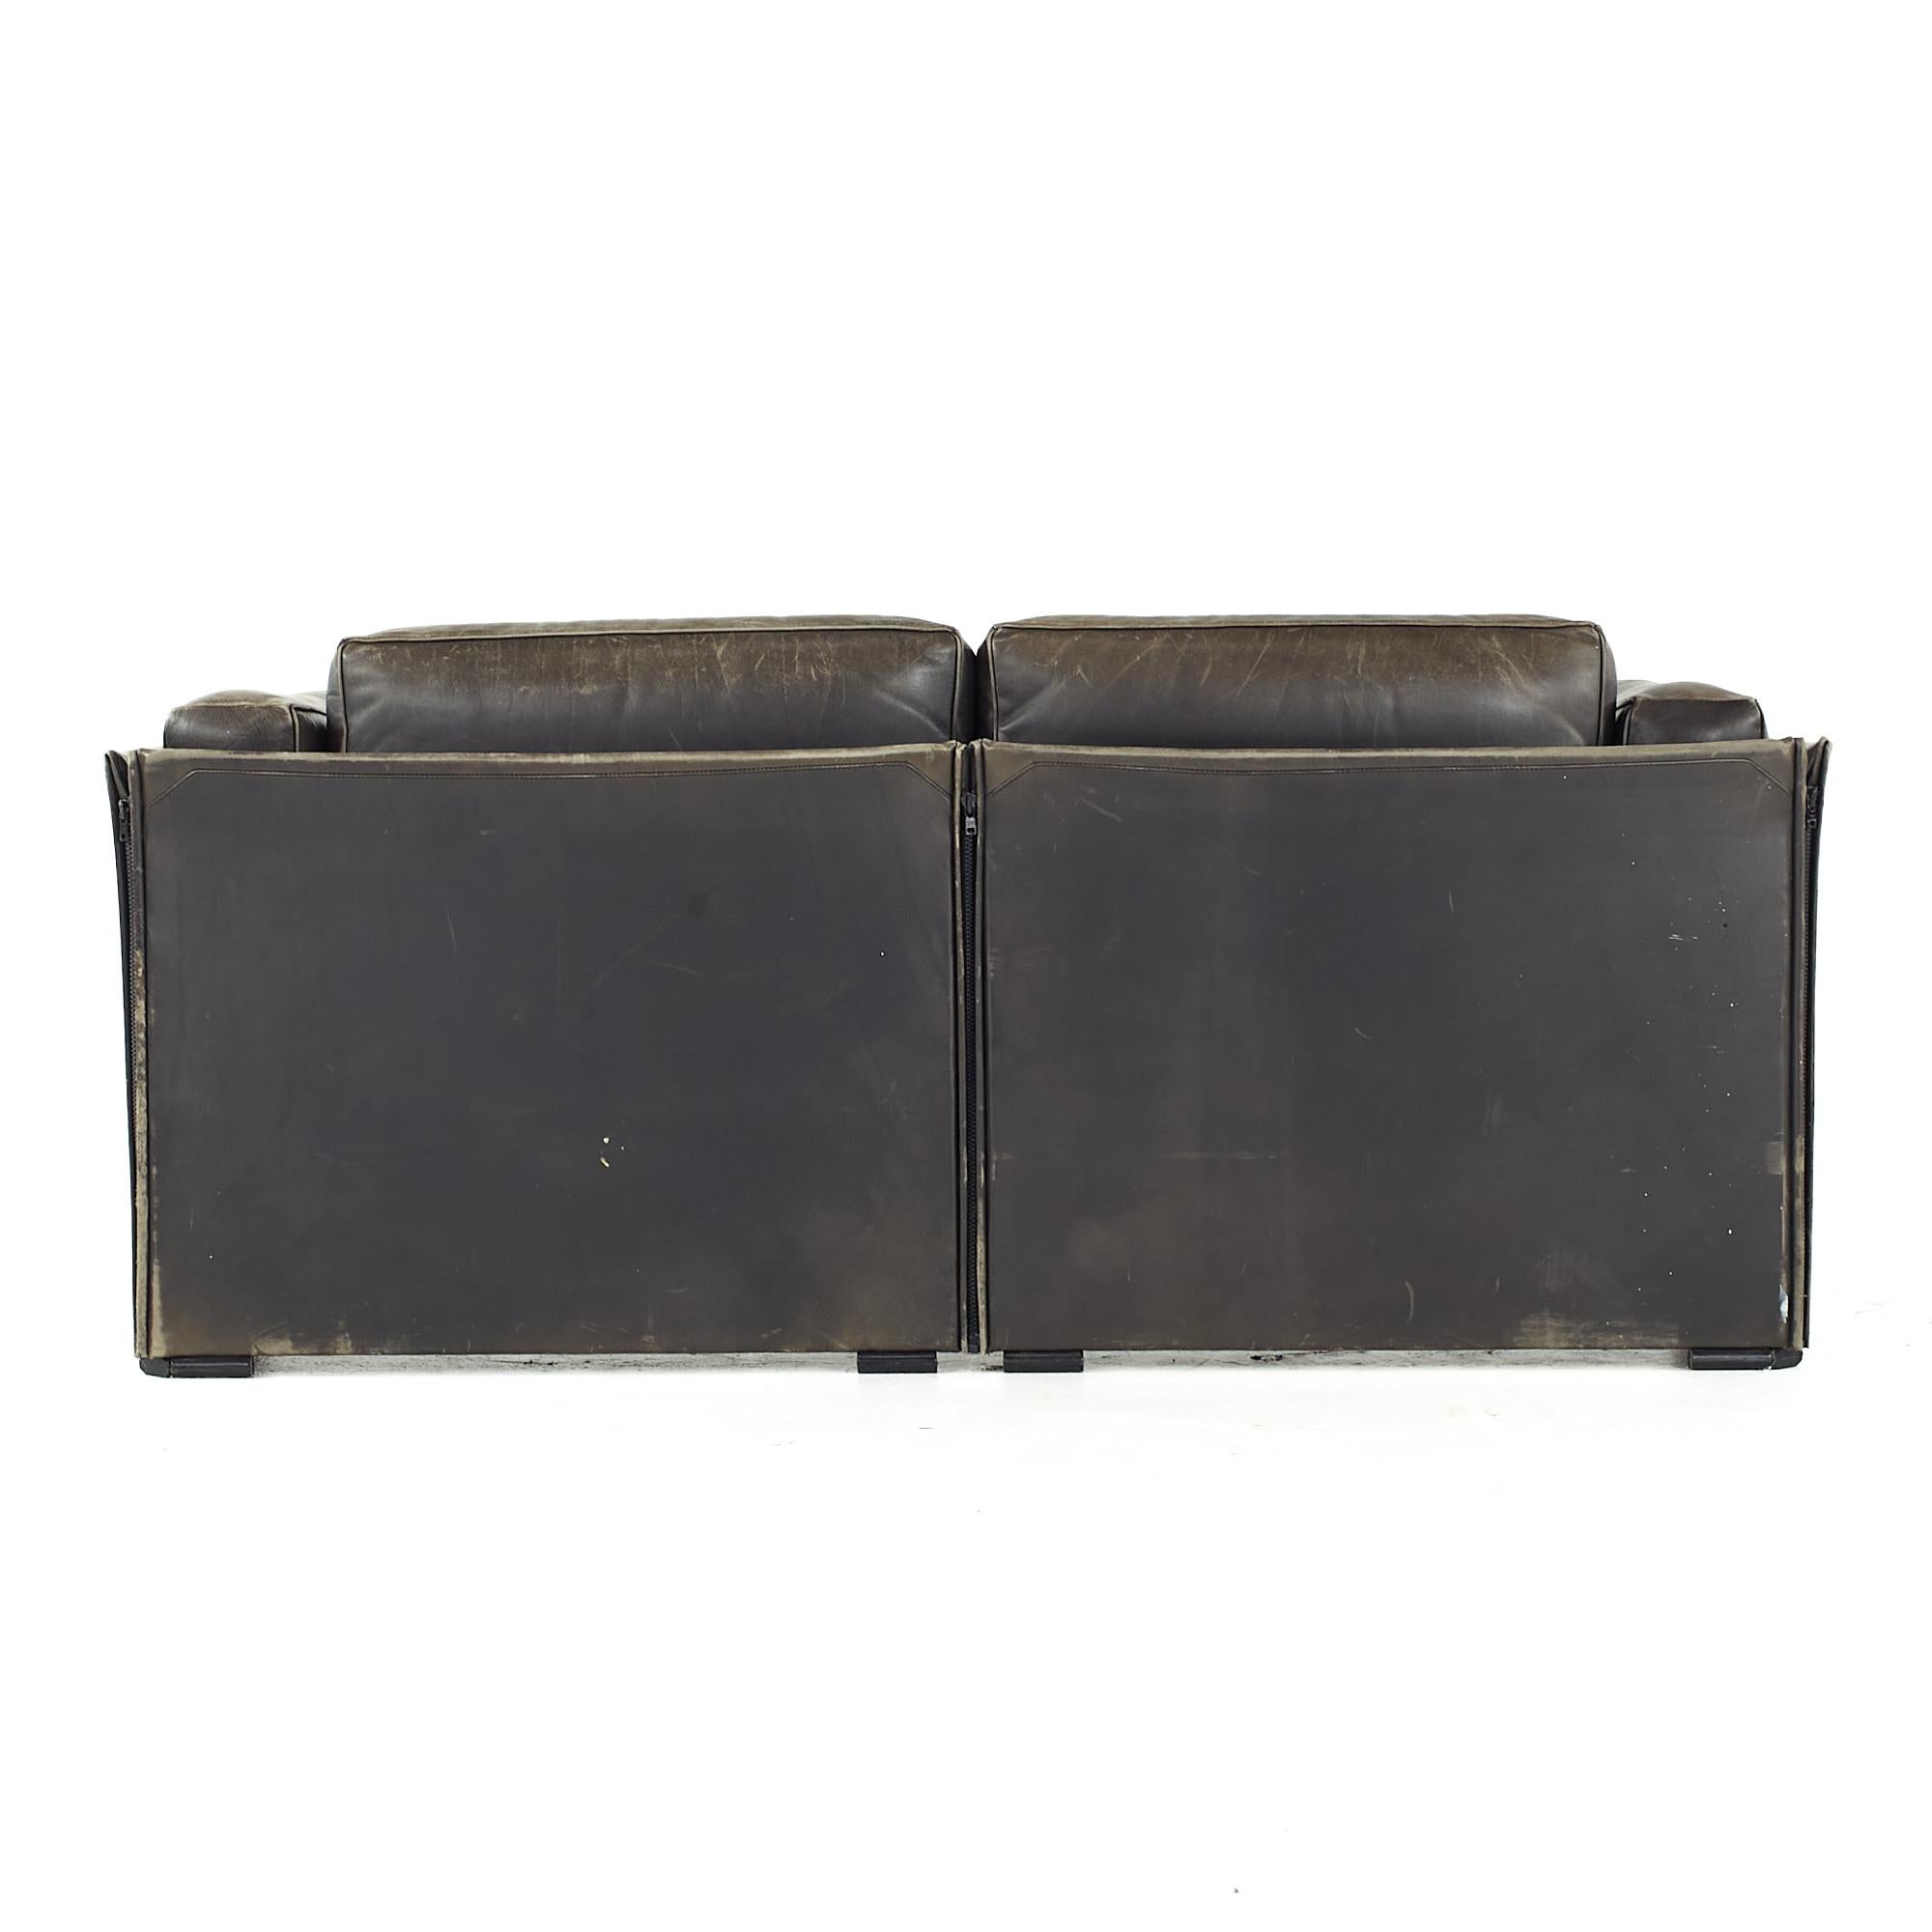 Afra and Tobia Scarpa for Cassina Midcentury Italian Leather Sofas, Pair For Sale 3